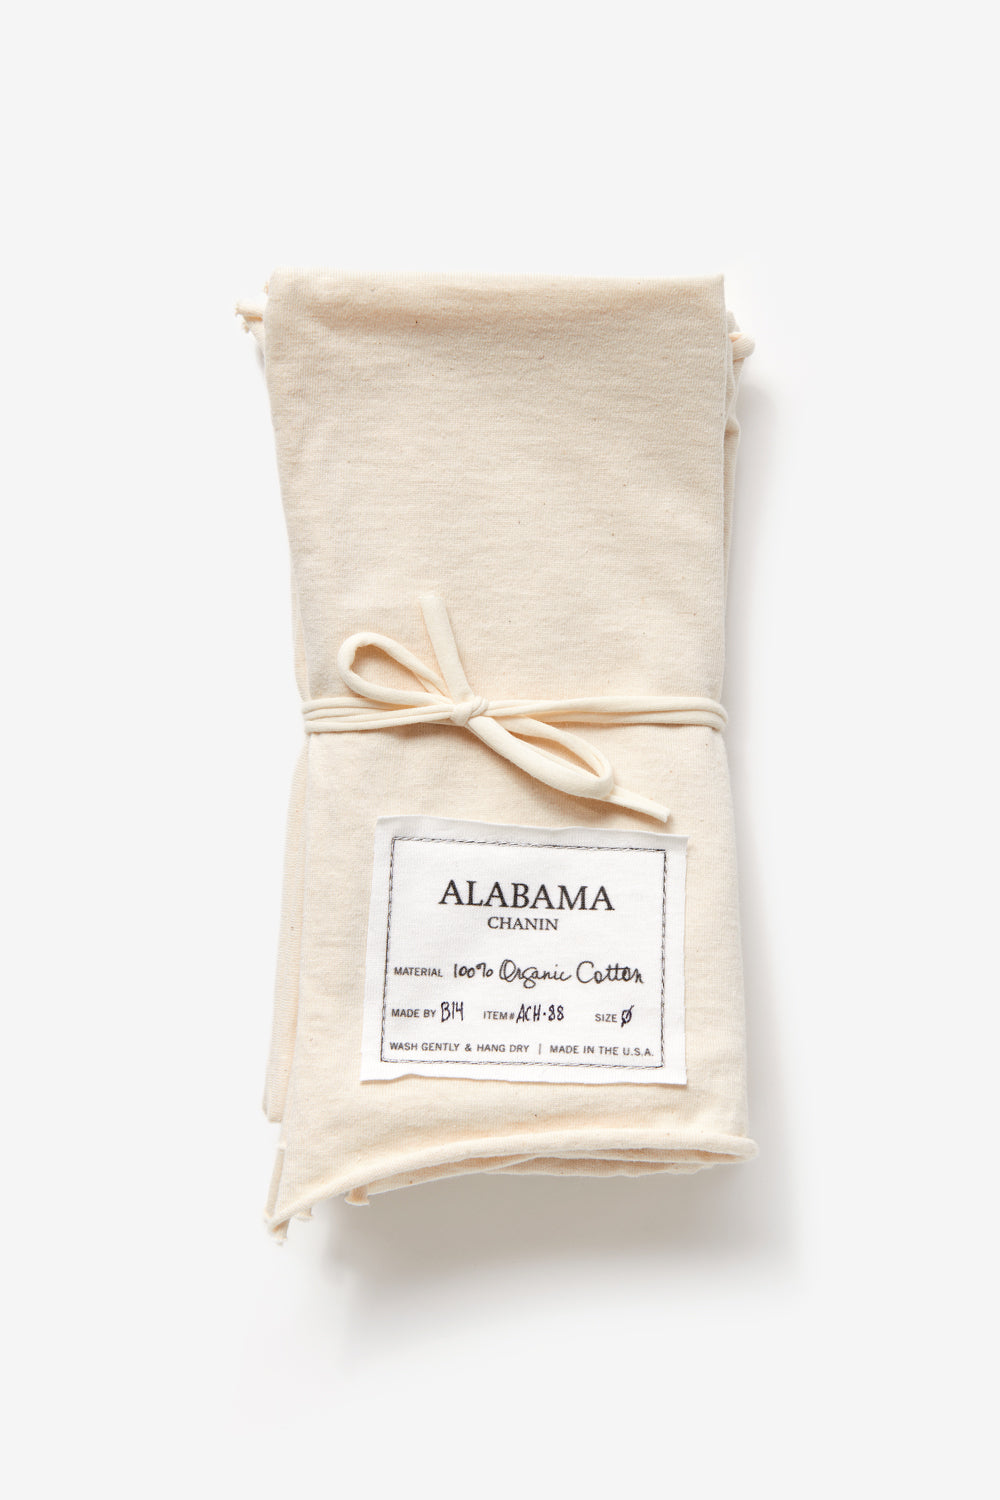 Alabama Chanin Set of Four Dinner Napkins in Natural Organic Cotton